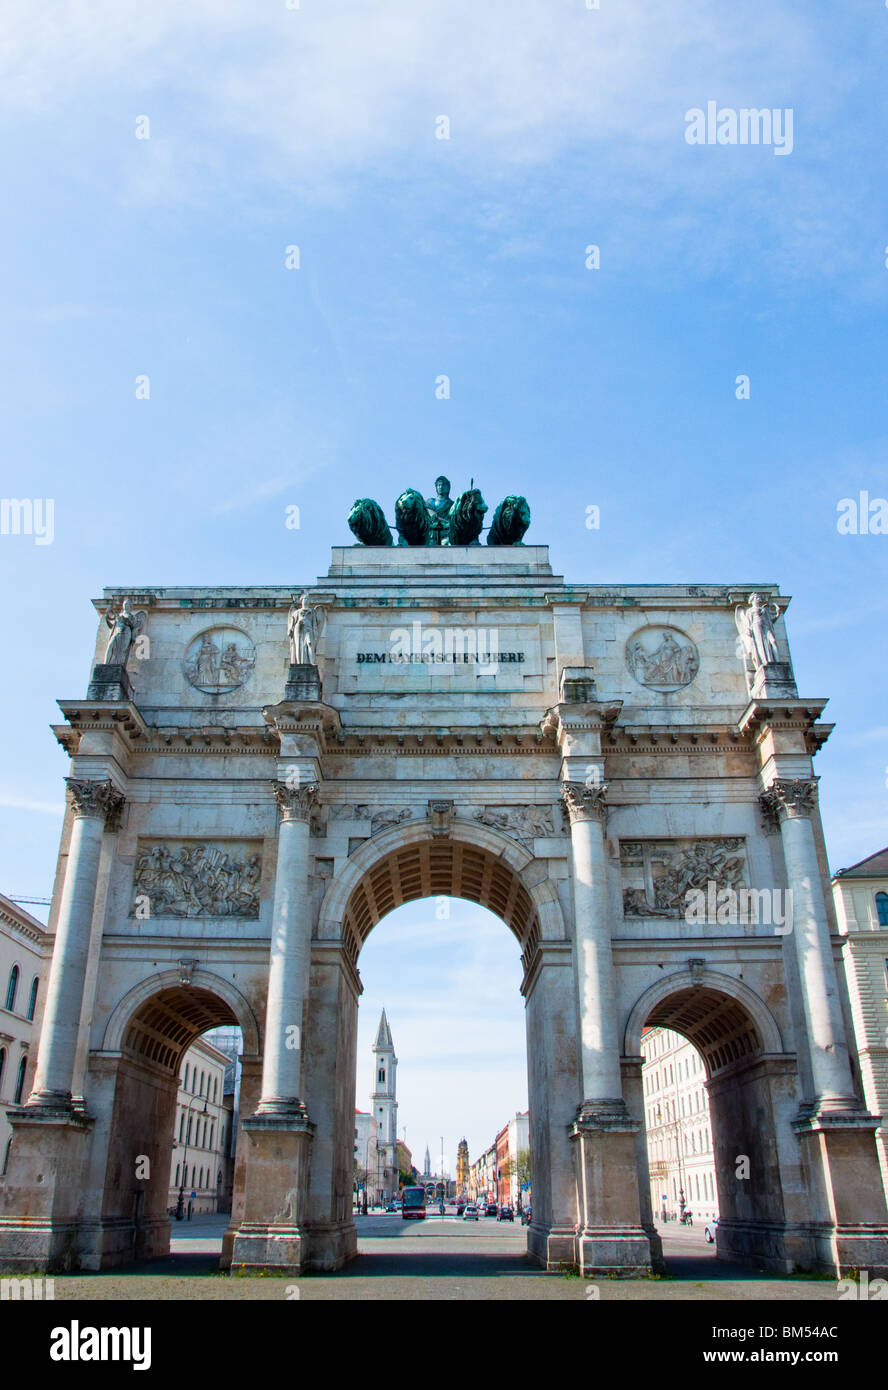 View through the Siegestor (Victory Arch), Munich Stock Photo